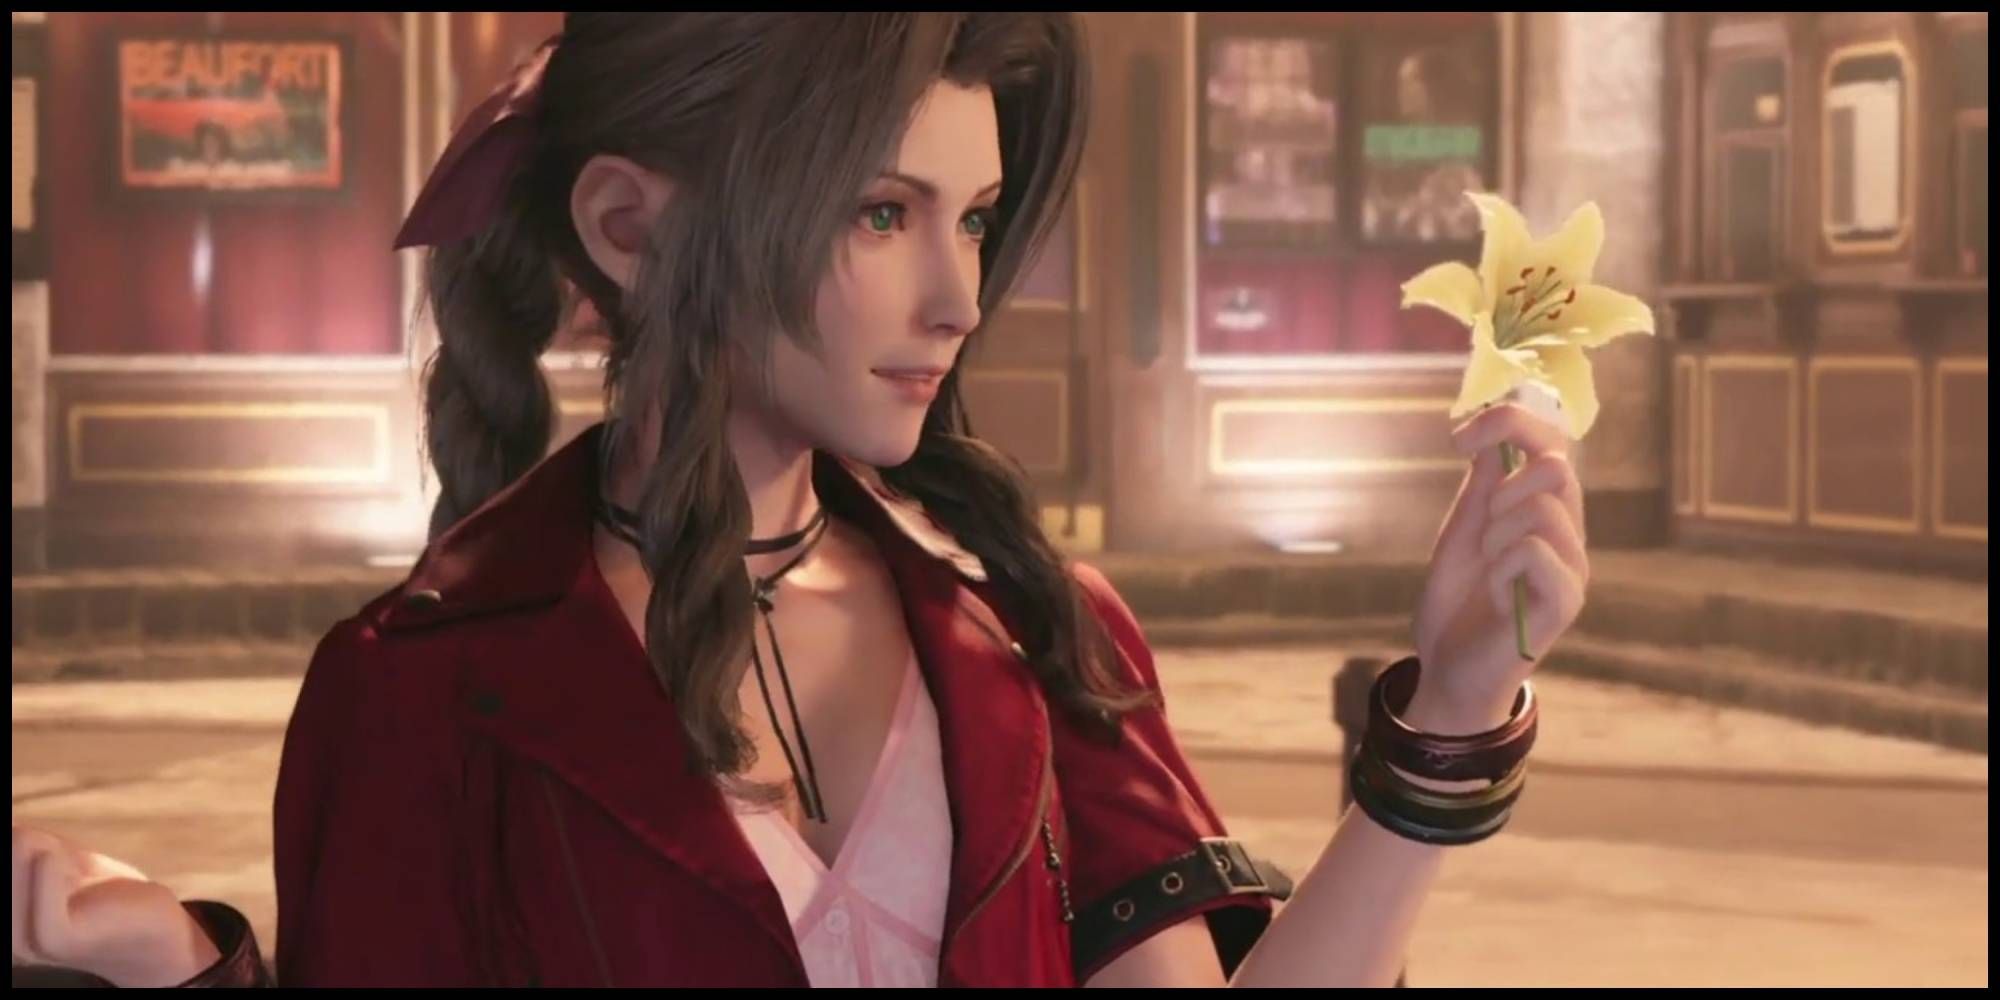 Aerith While Meeting Cloud For the First Time in Final Fantasy 7 Remake